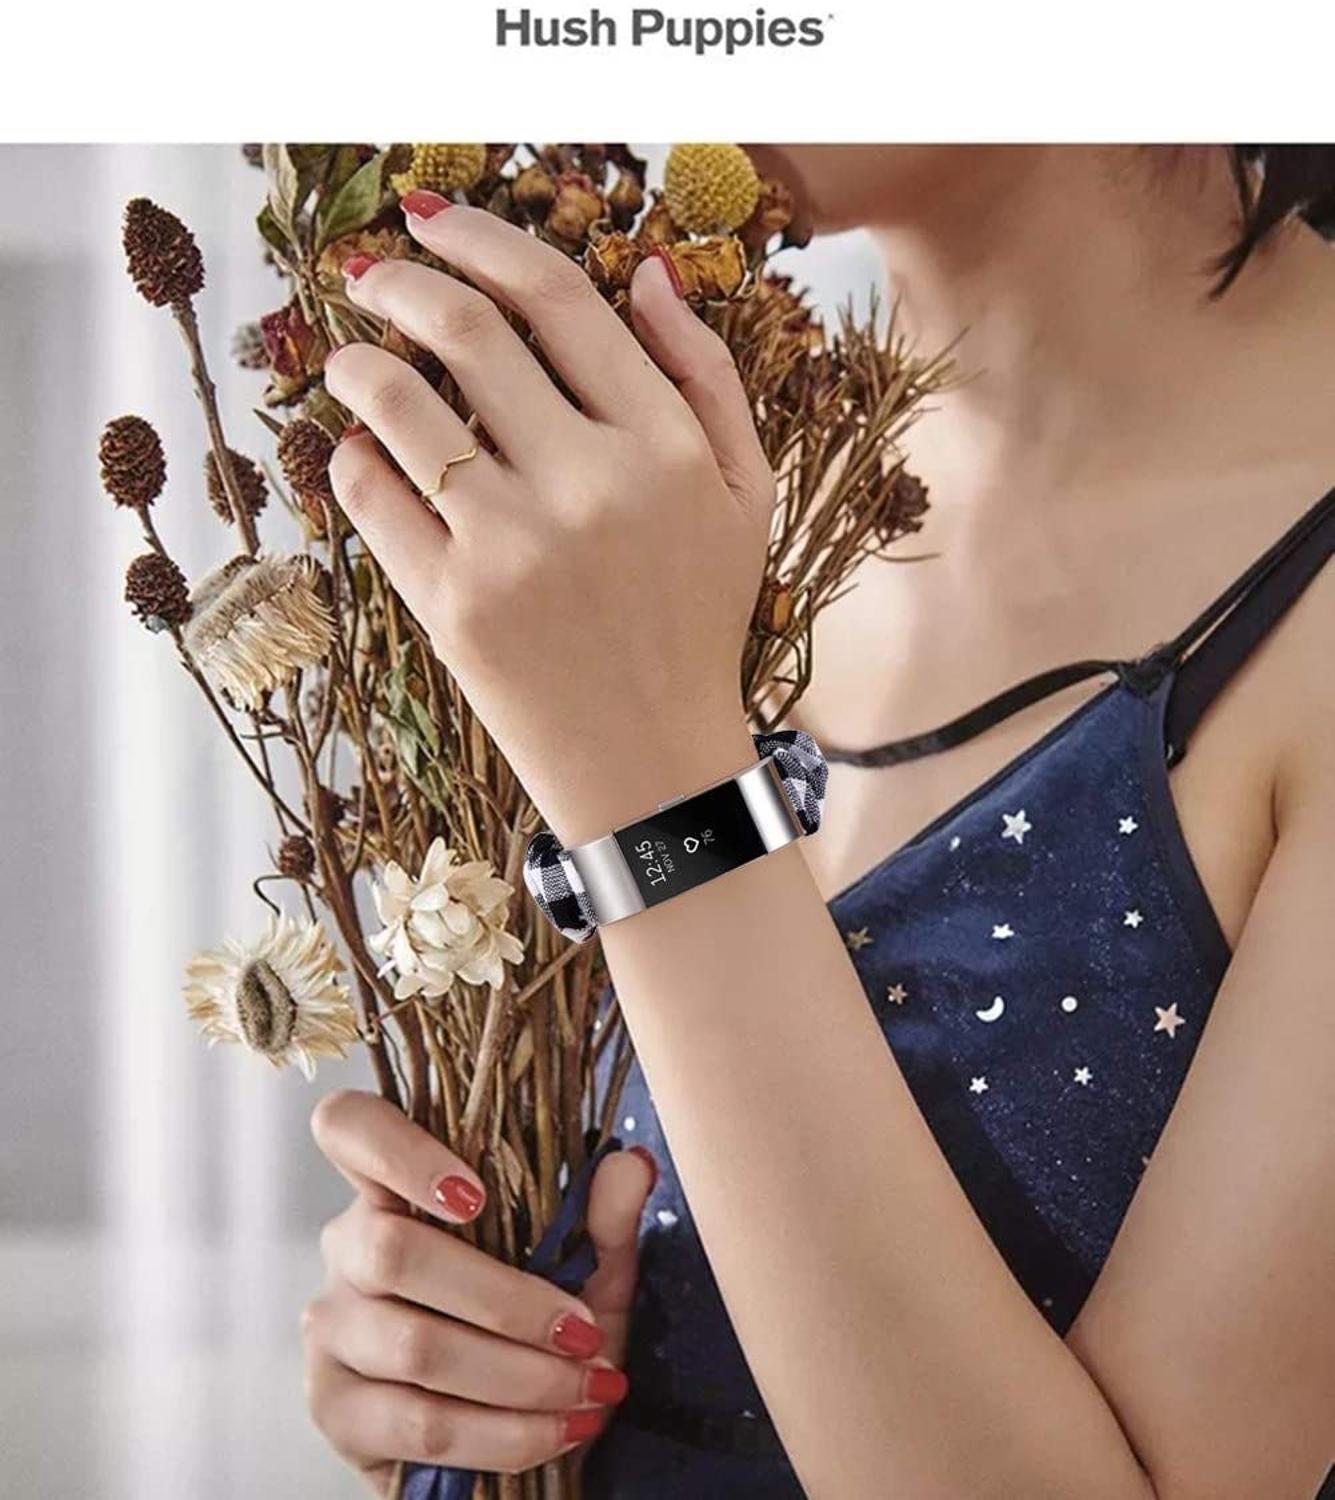 scrunchie band for fitbit